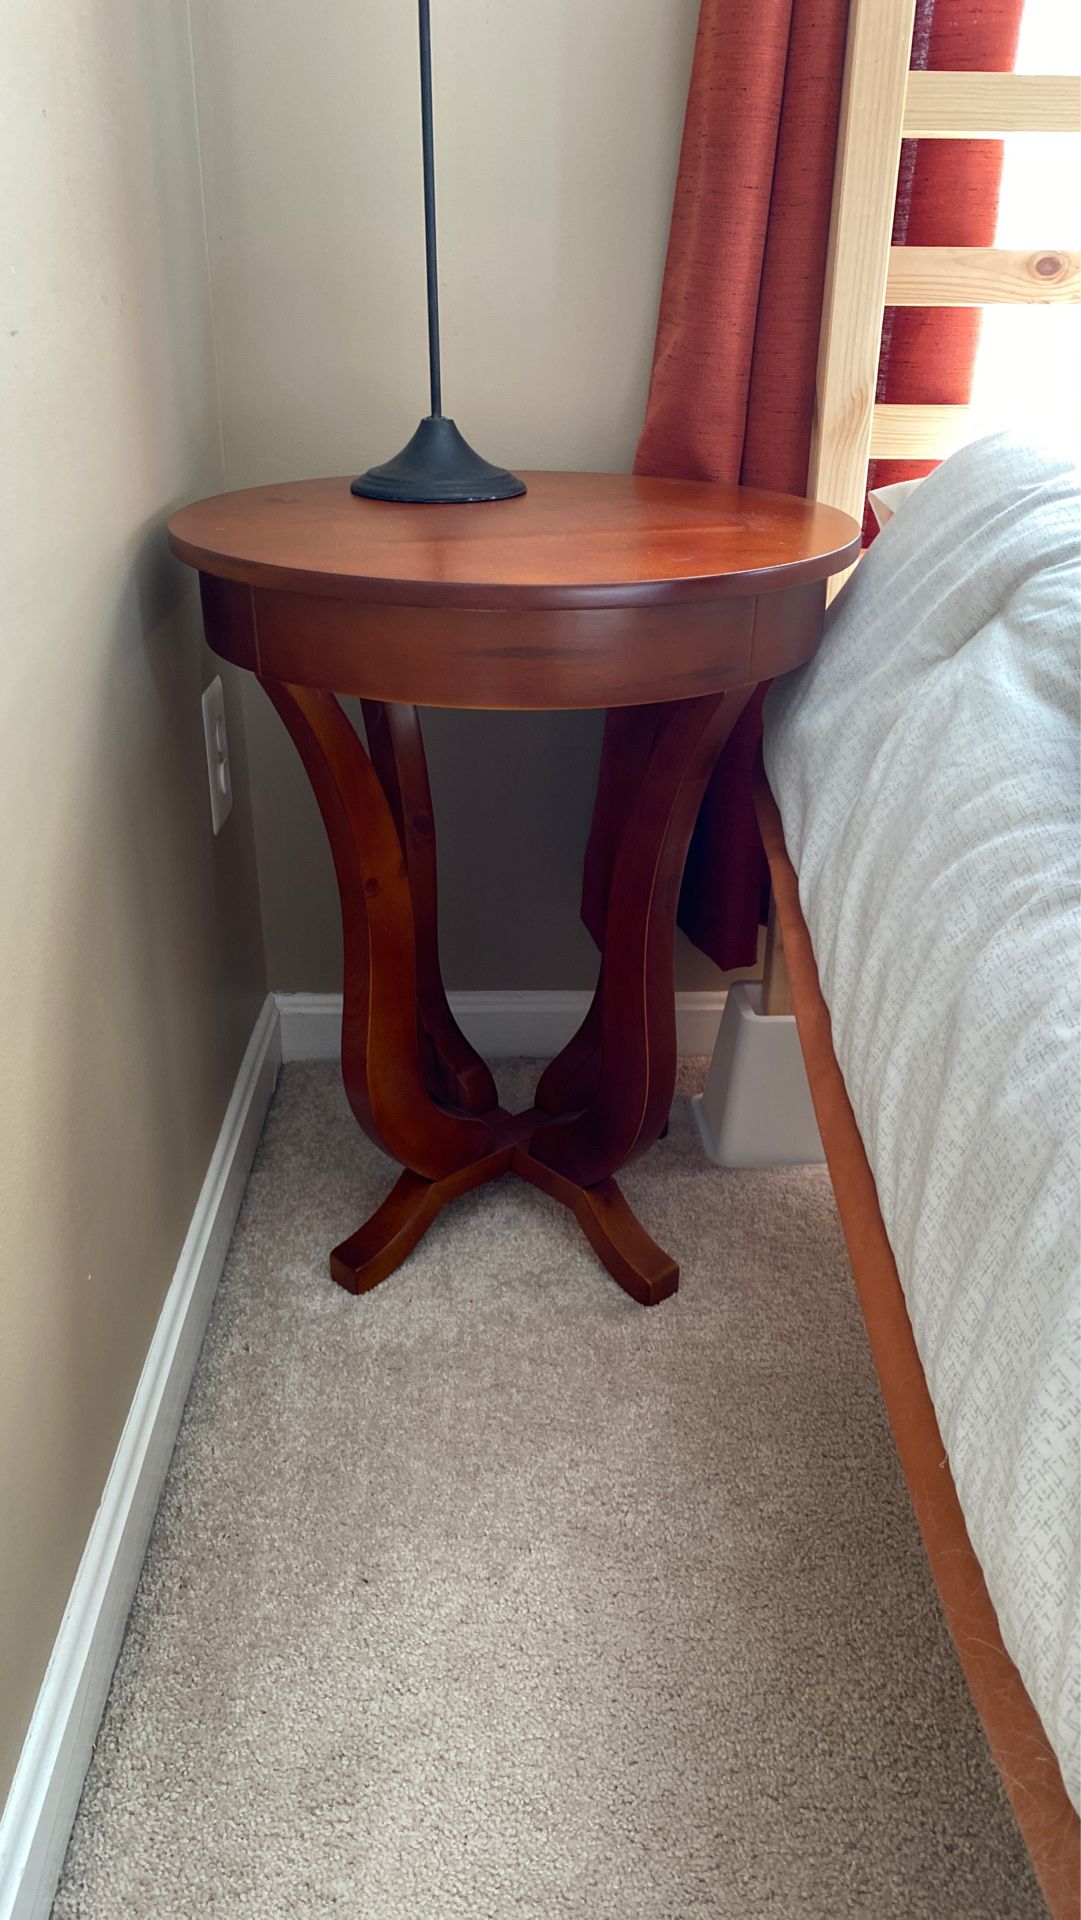 Little round end table